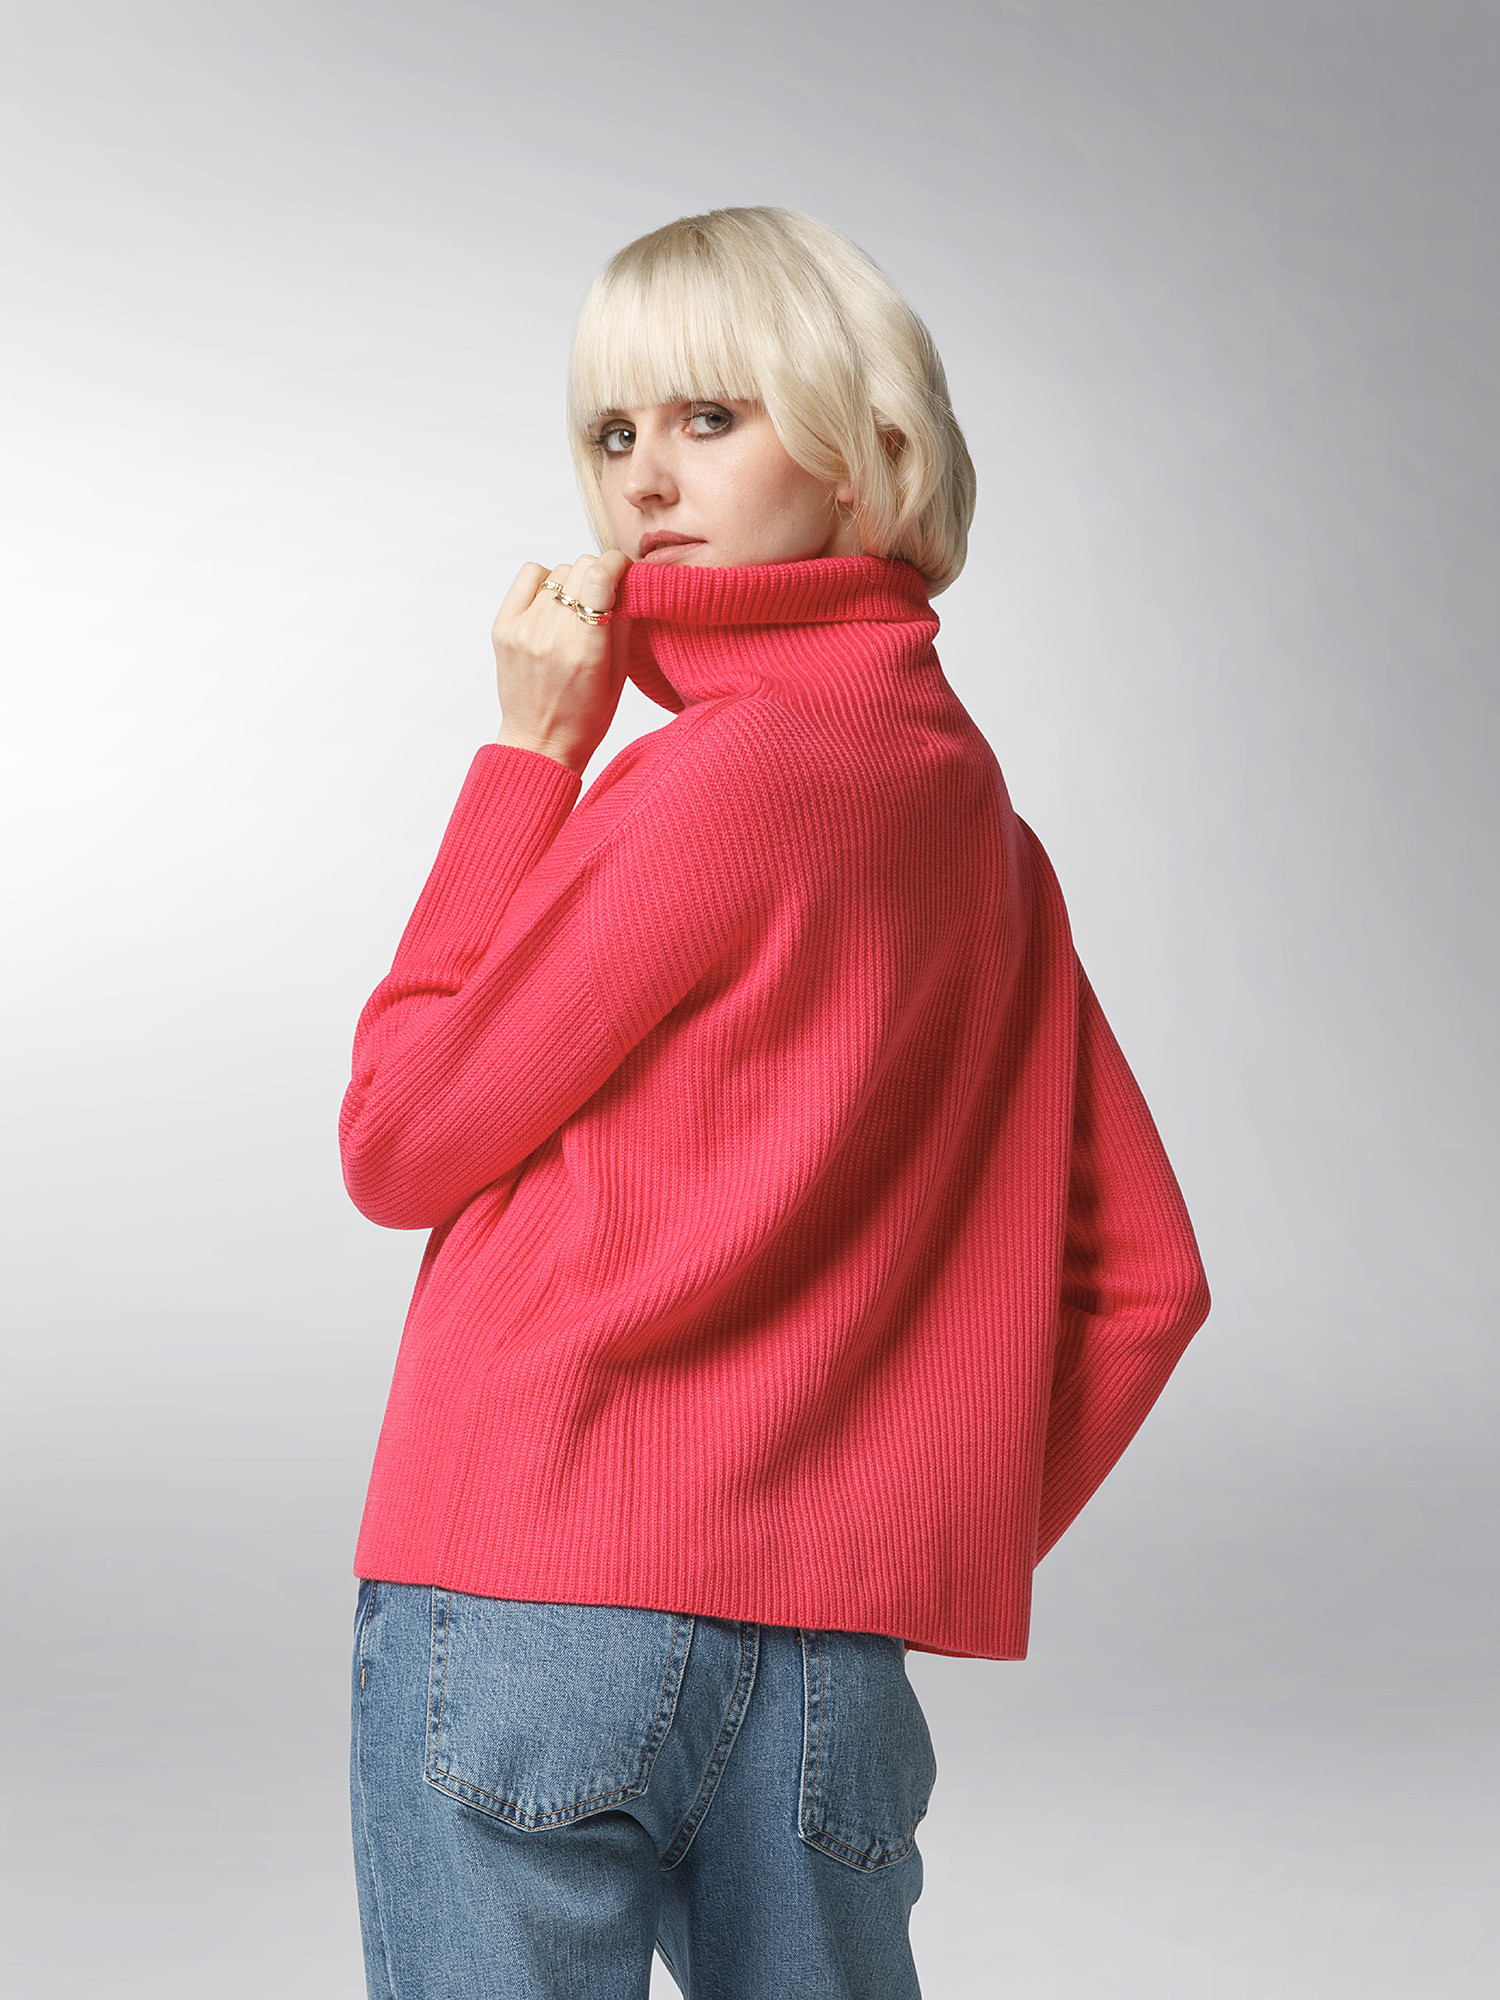 K Collection - Pullover dolcevita in lana extrafine, Rosa fuxia, large image number 5